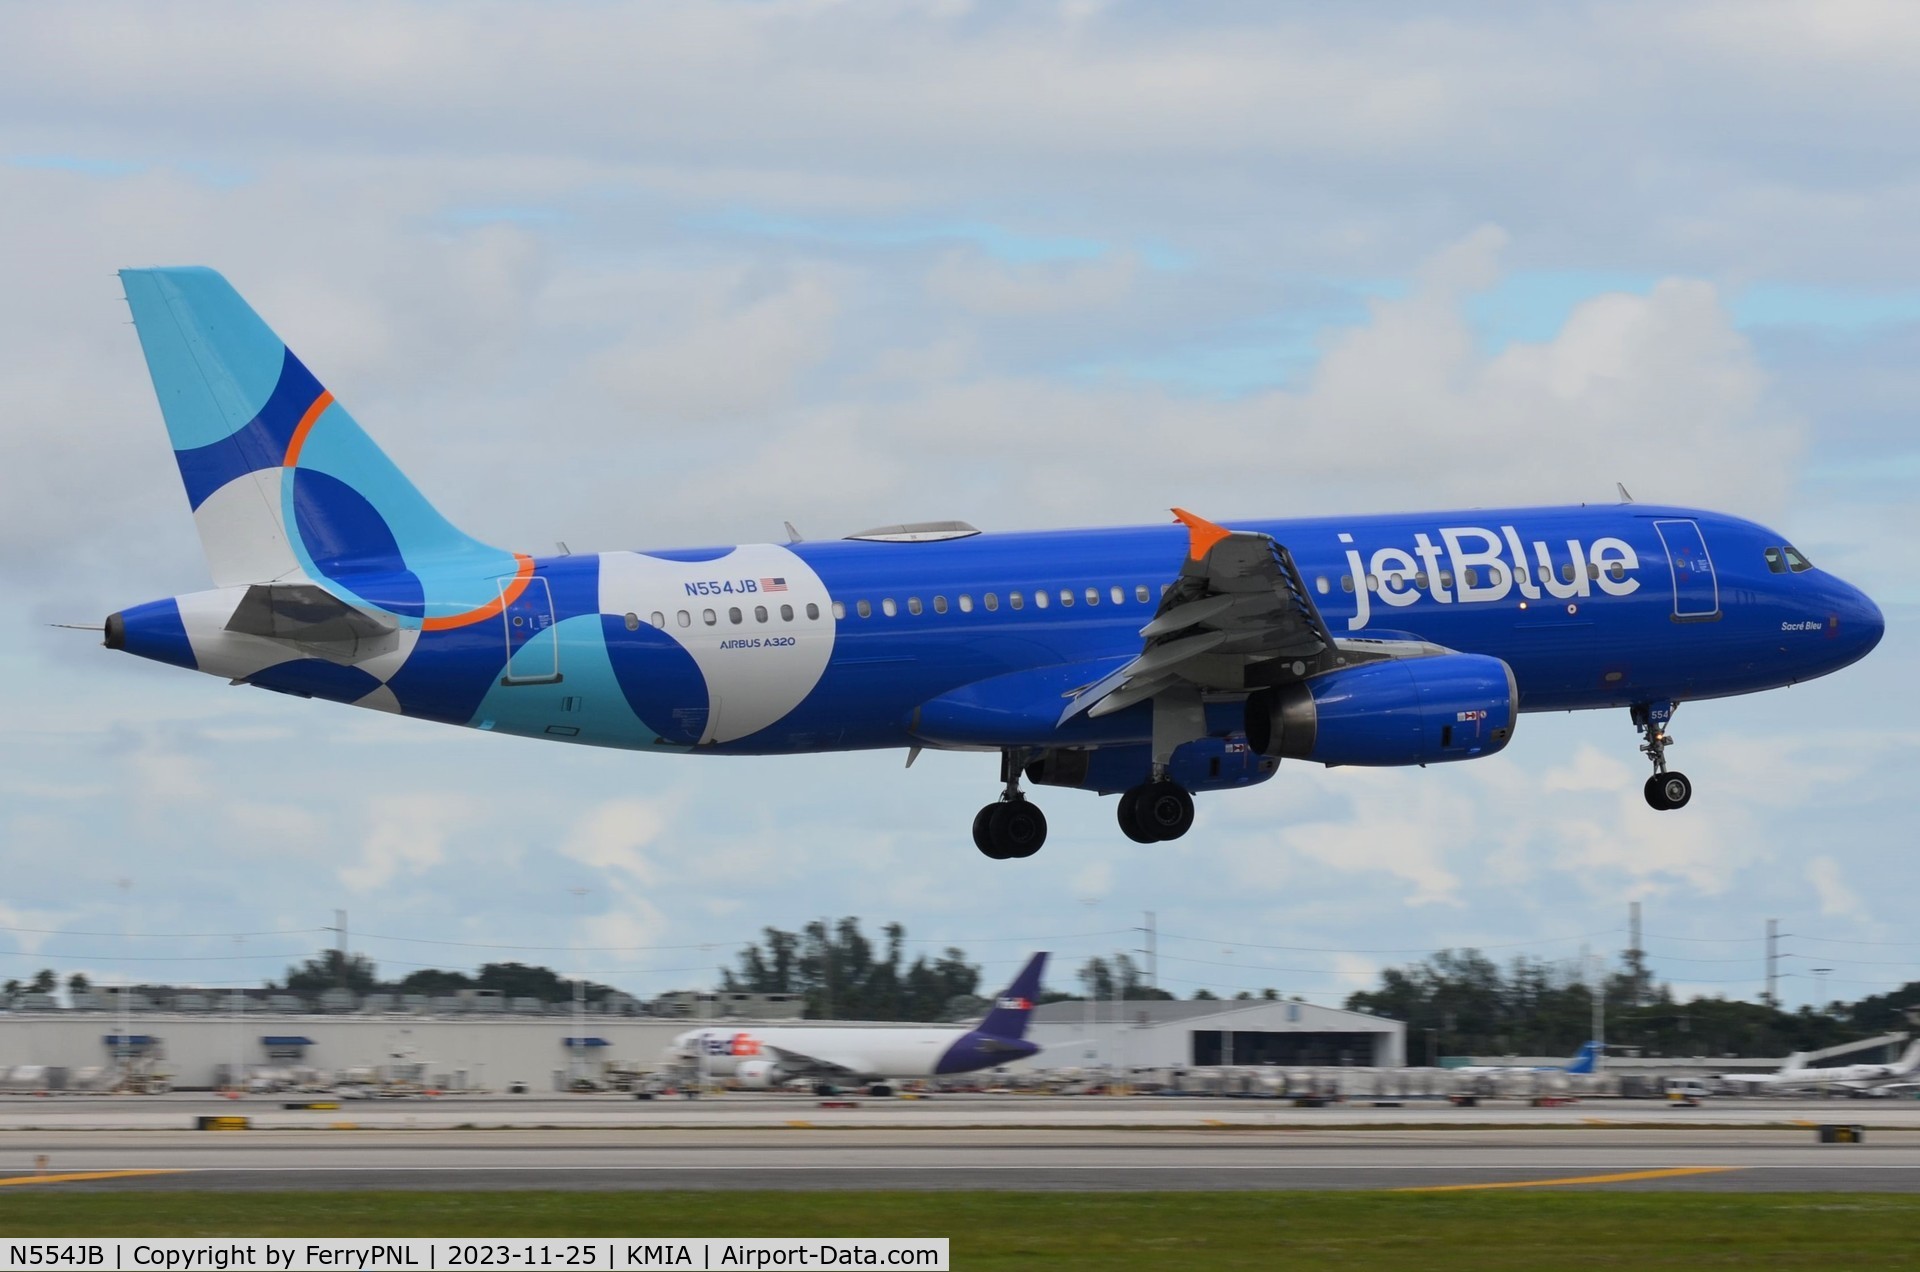 N554JB, 2002 Airbus A320-232 C/N 1898, JetBlue A320 in revised livery landing